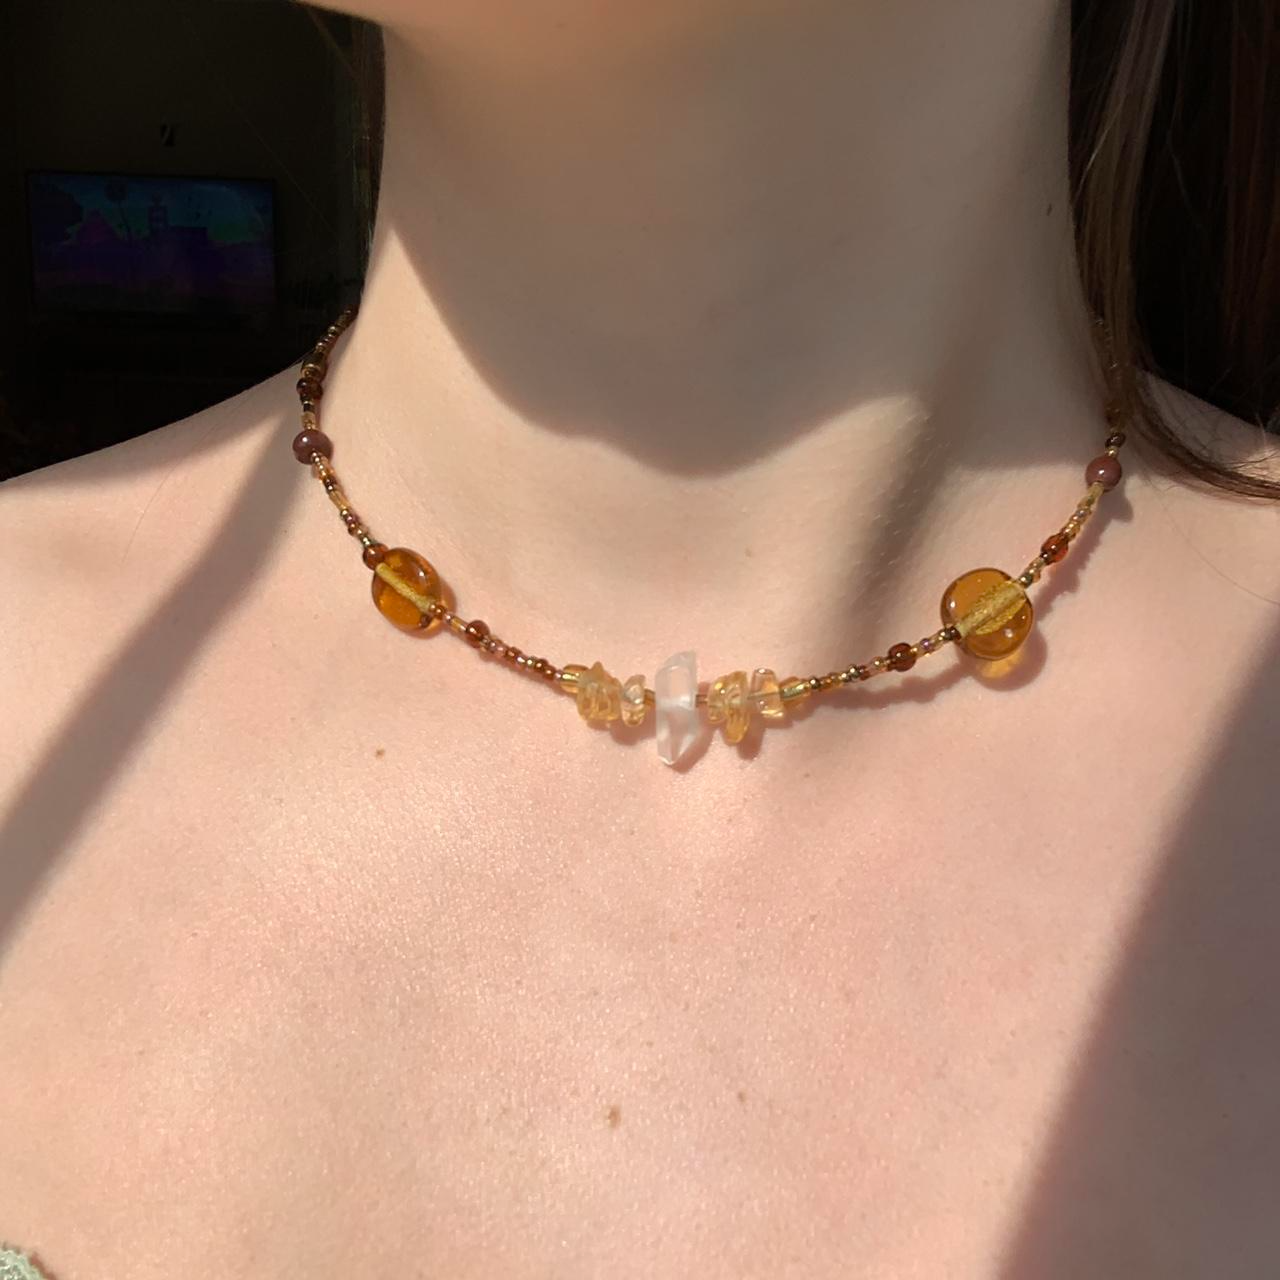 Decorate yourself with the best Amber Jewelry